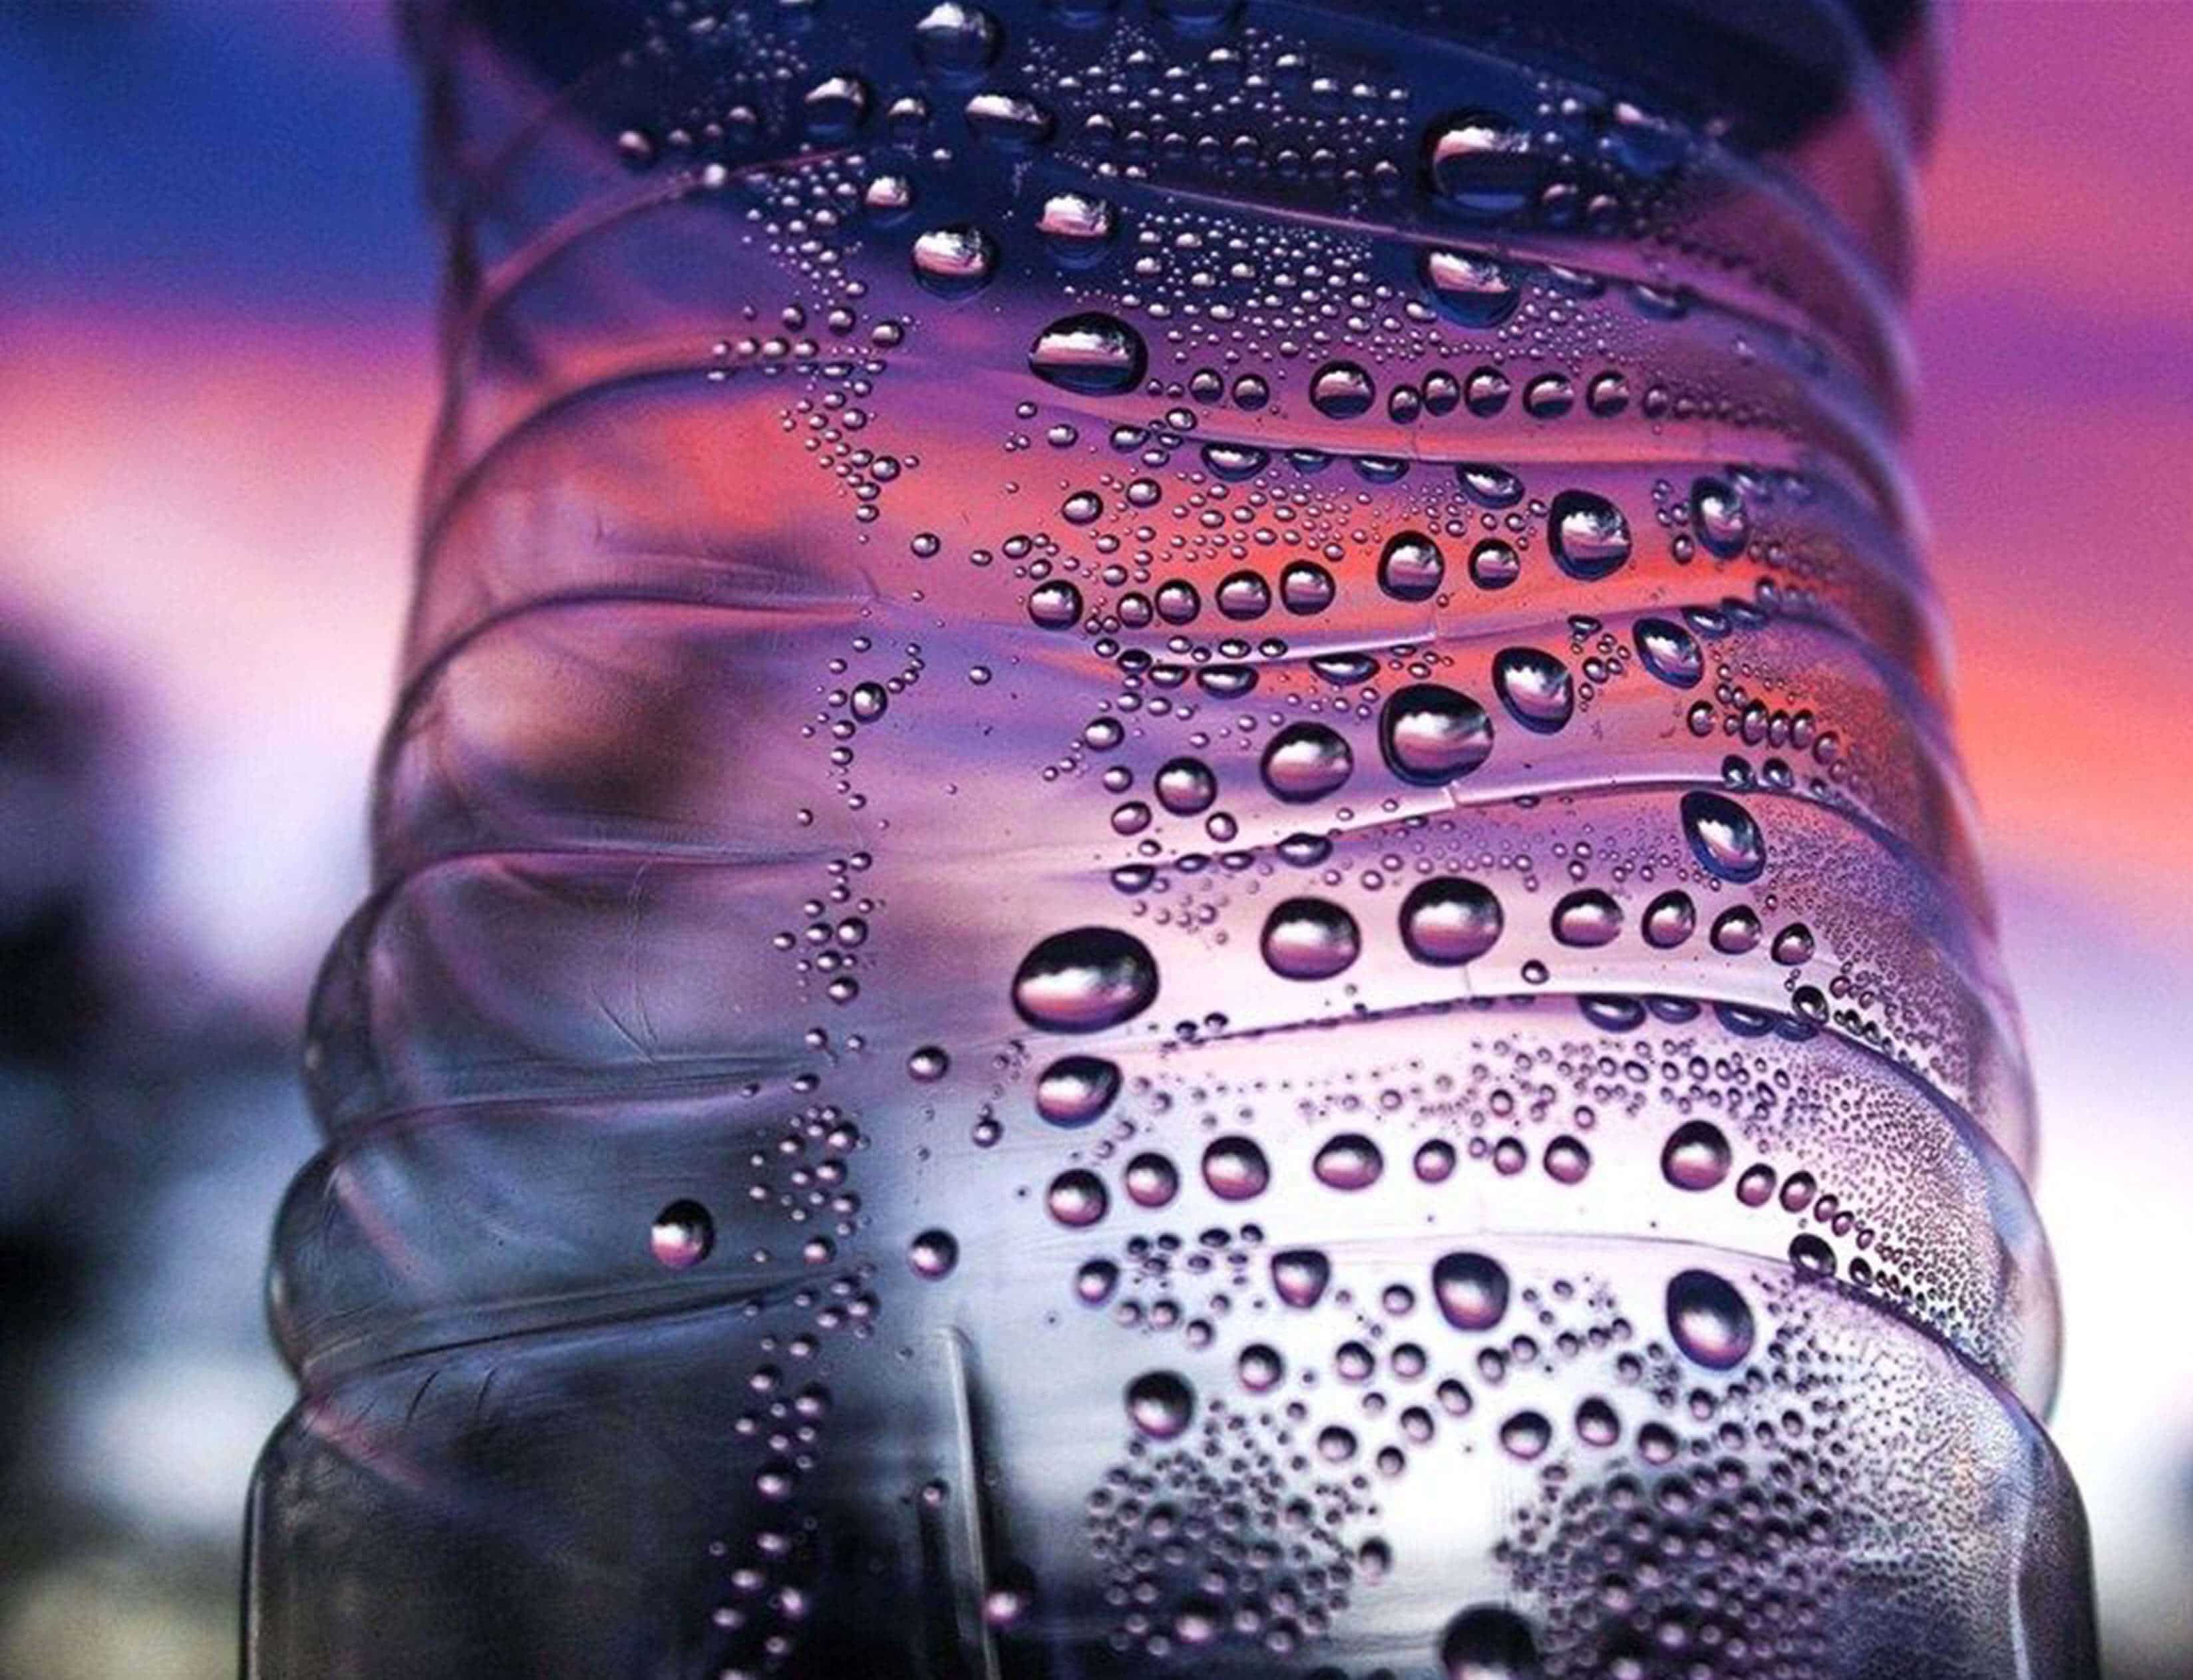 Stacy Fortes ’18, of Union, earned an Honorable Mention for her photo “Sunset in a Bottle” in the 2017 Regional Scholastic Art Competition.